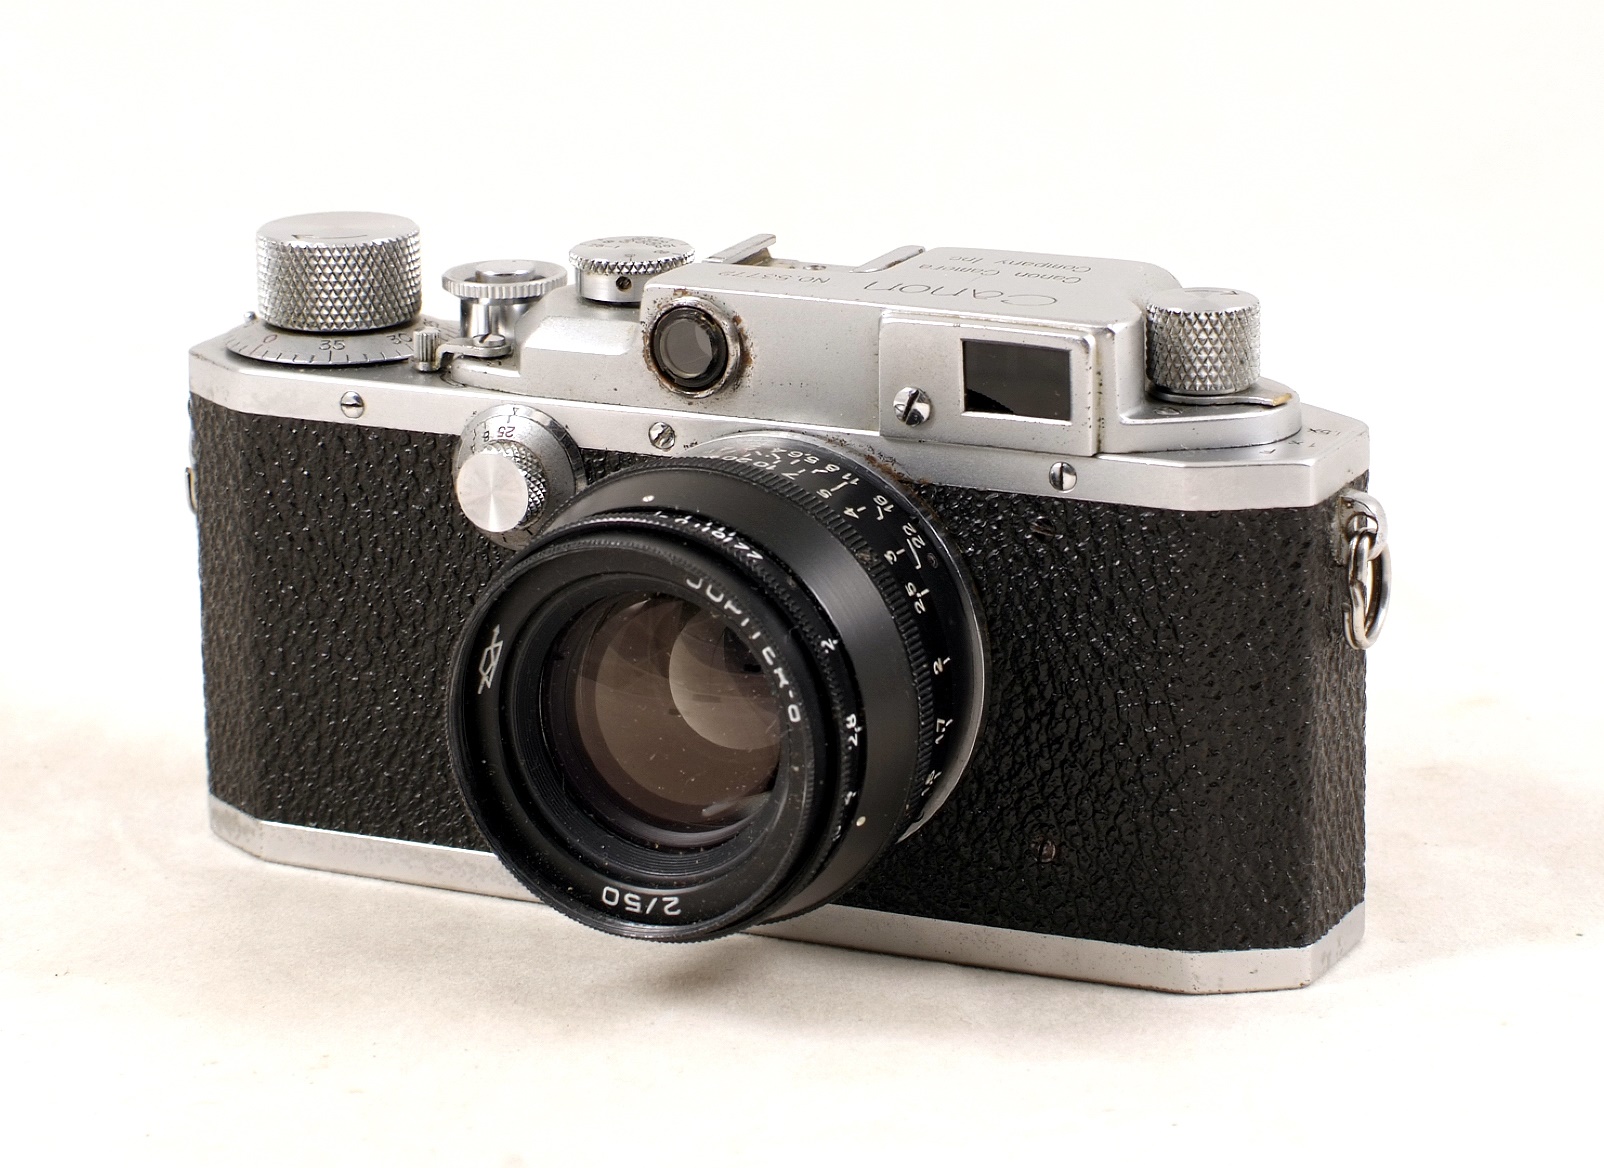 An Uncommon Canon Rangefinder Camera, Model IIc with Jupiter Lens - Image 3 of 3